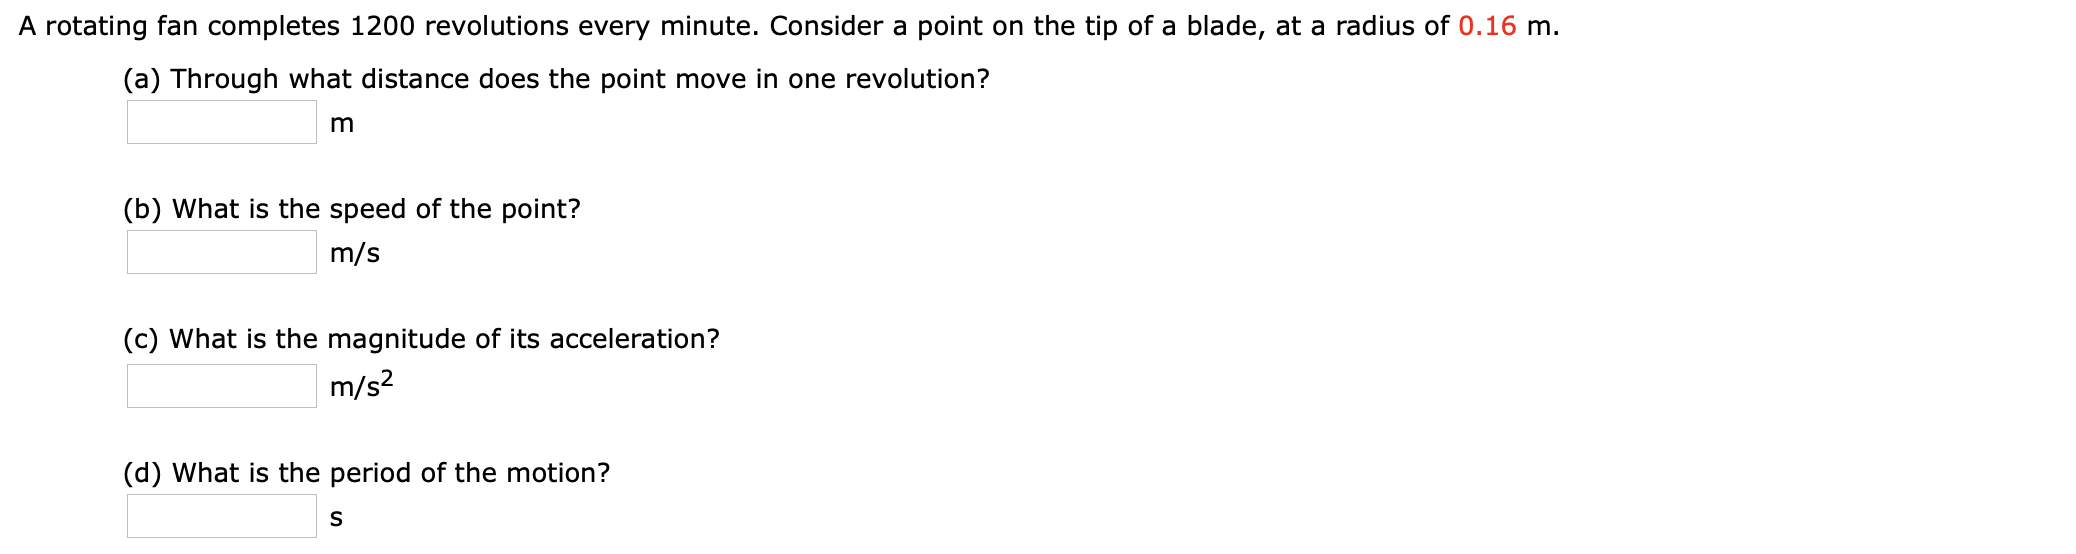 A rotating fan completes 1200 revolutions every minute. Consider a point on the tip of a blade, at a radius of 0.16 m.
(a) Through what distance does the point move in one revolution?
m
(b) What is the speed of the point?
m/s
(c) What is the magnitude of its acceleration?
m/s?
(d) What is the period of the motion?
